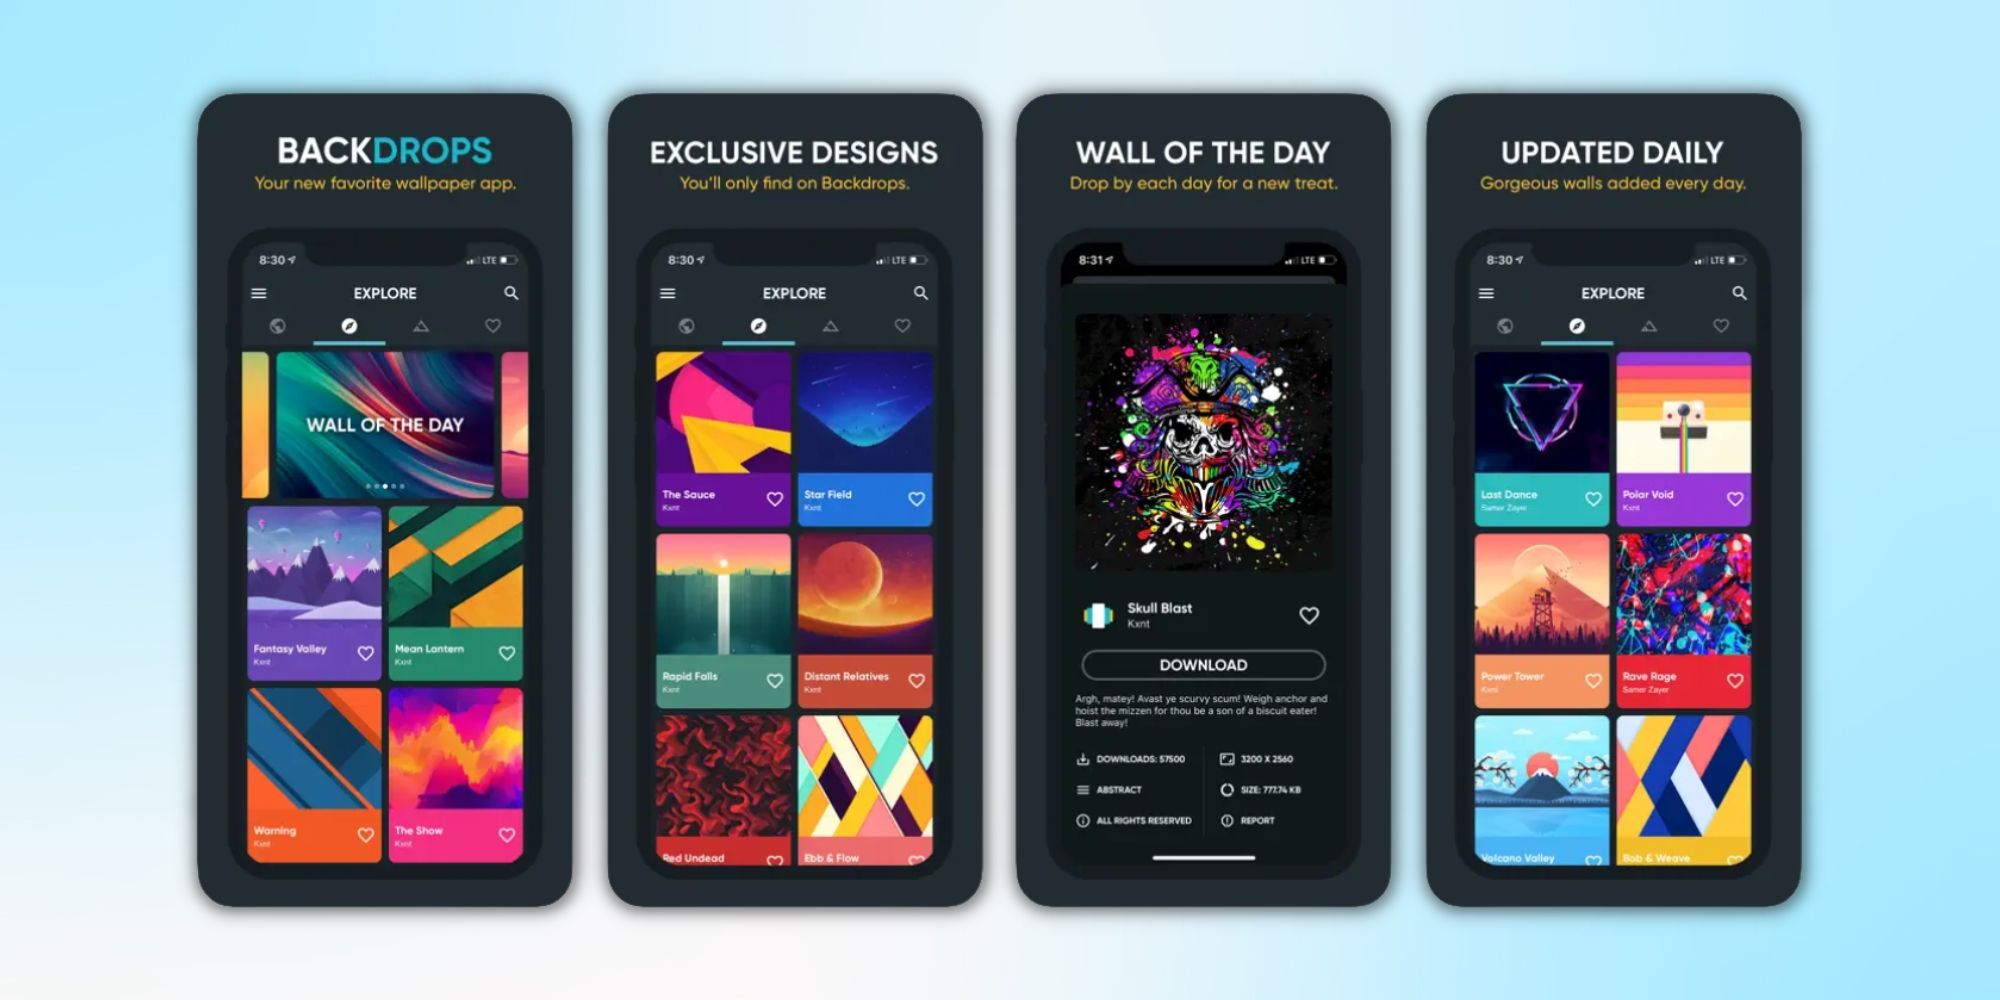 10 Best Free Wallpaper Apps For iPhone In 2023, Ranked